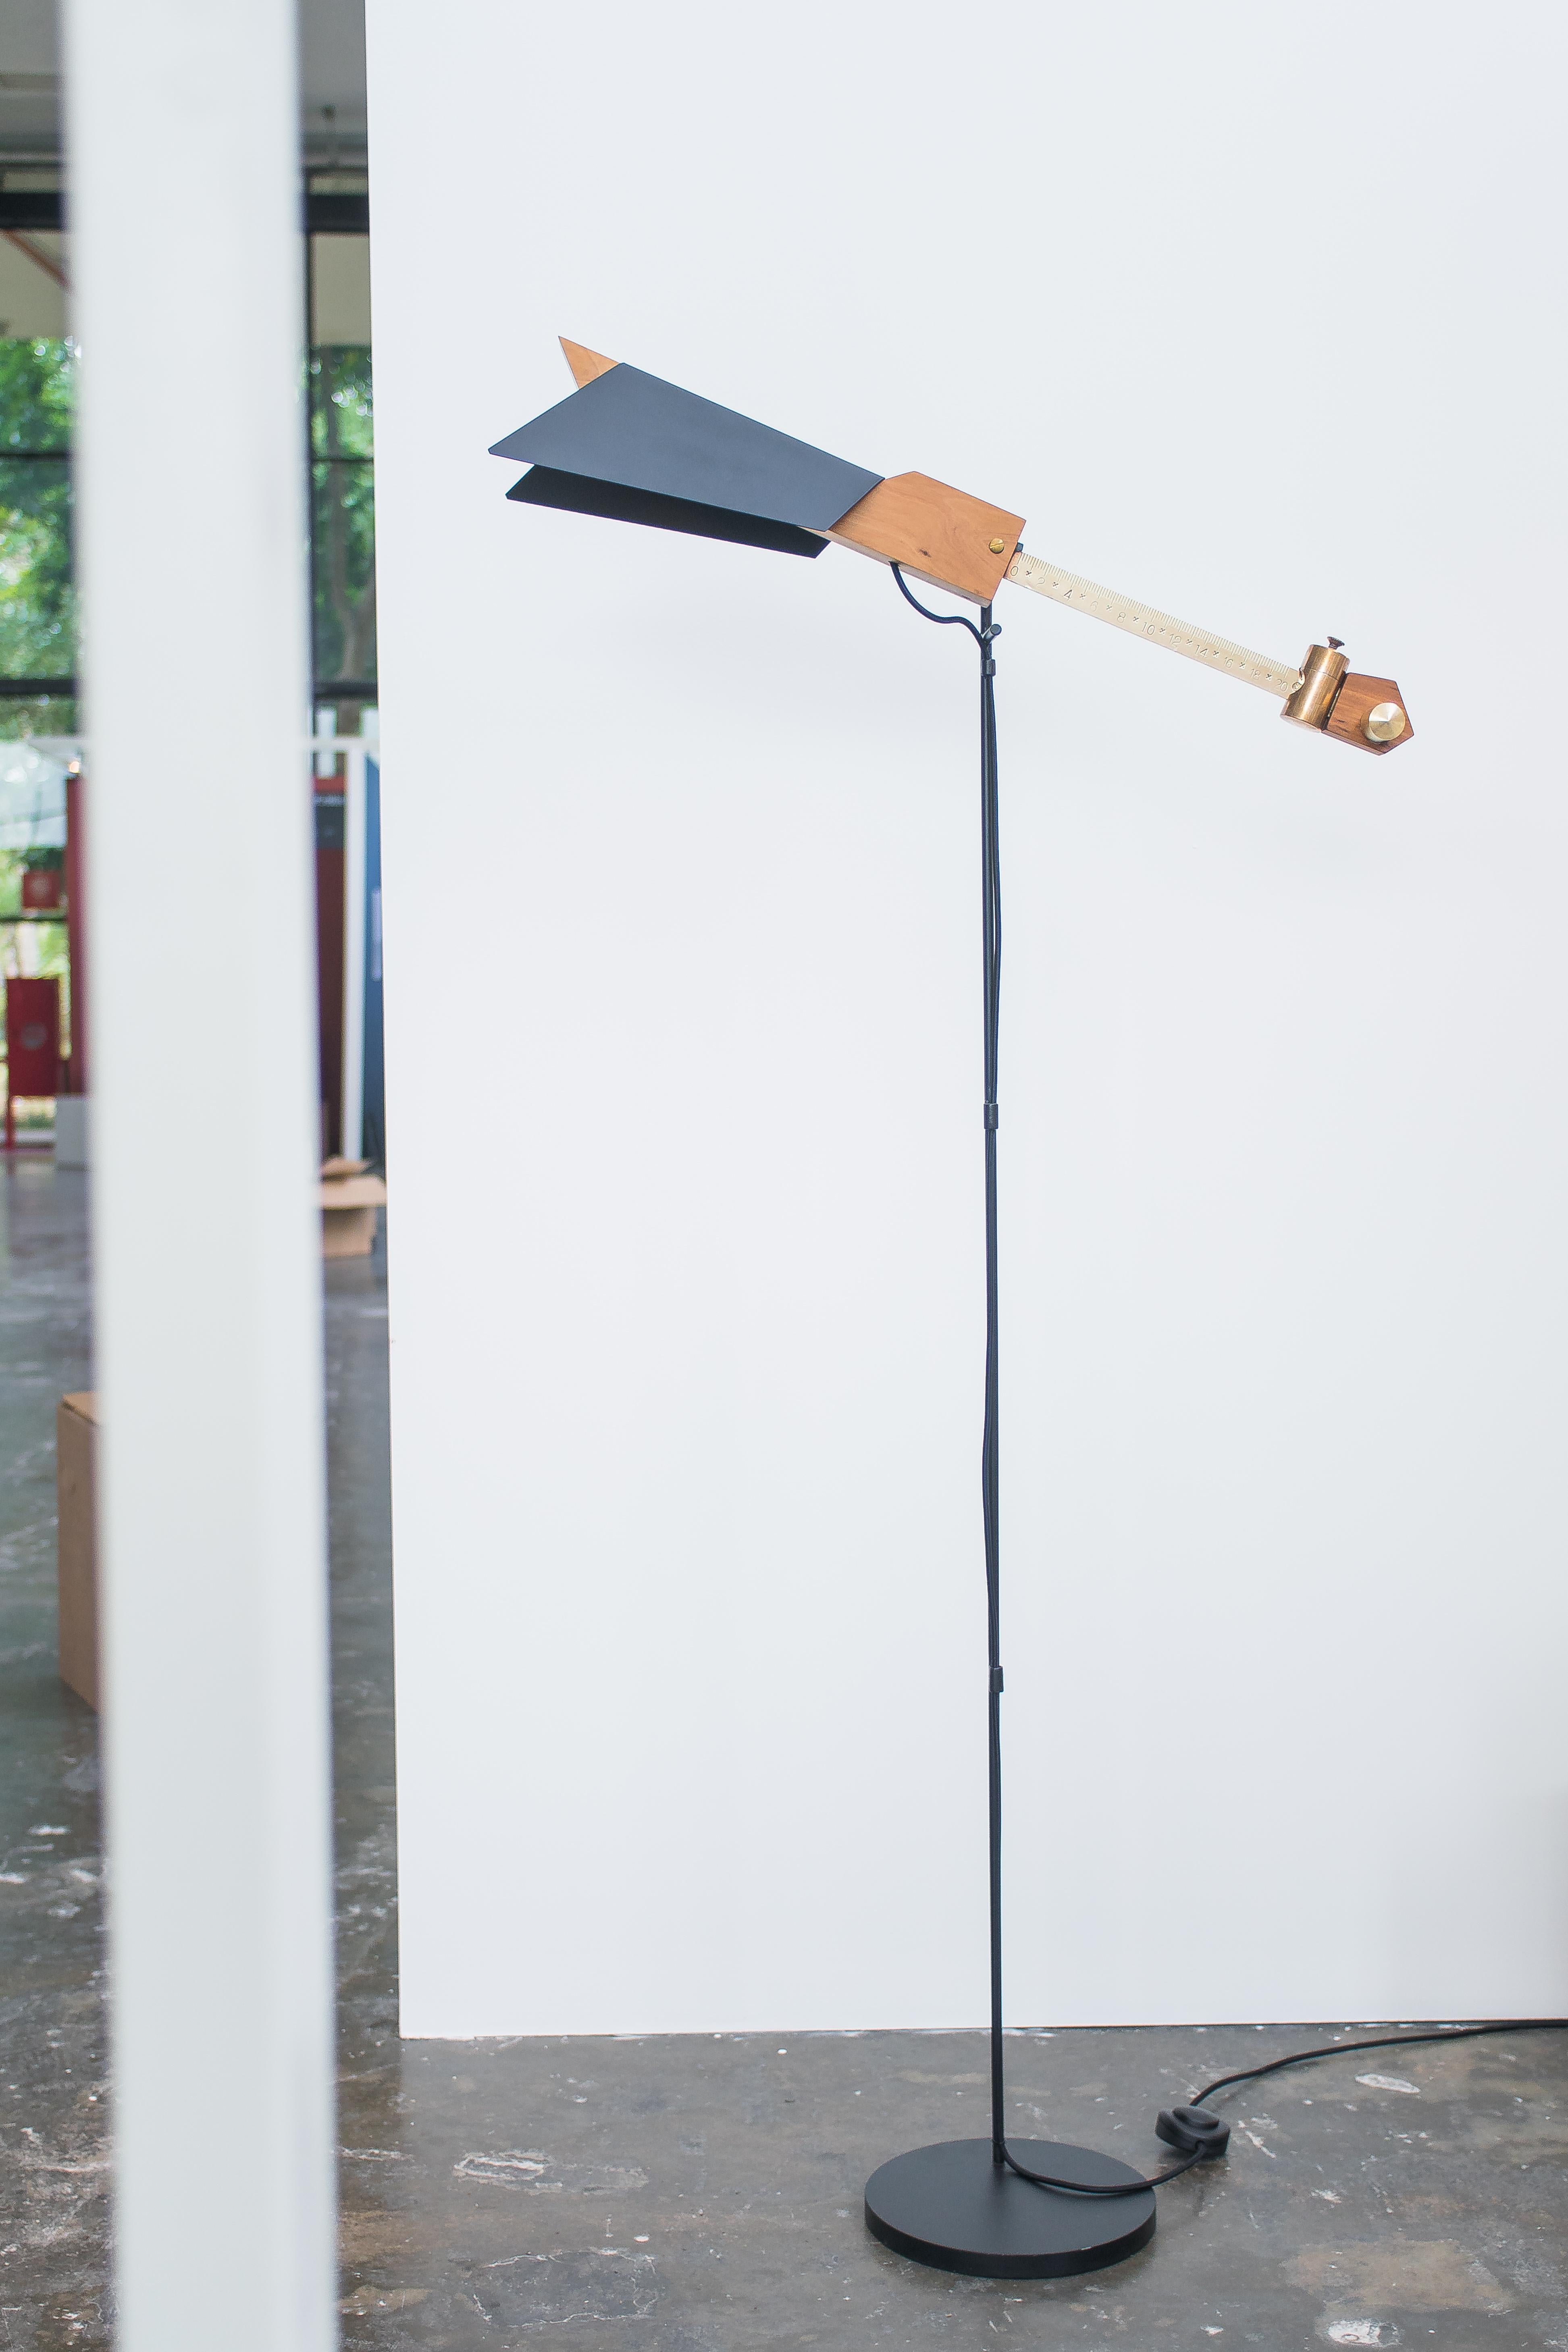 Volare floor lamp by Caio Superchi
Dimensions: D 75 x W 30 x H 145 cm 
Materials: Bronze, Wood, Metal
Limited edition of 3 + AP.

All our lamps can be wired according to each country. If sold to the USA it will be wired for the USA for